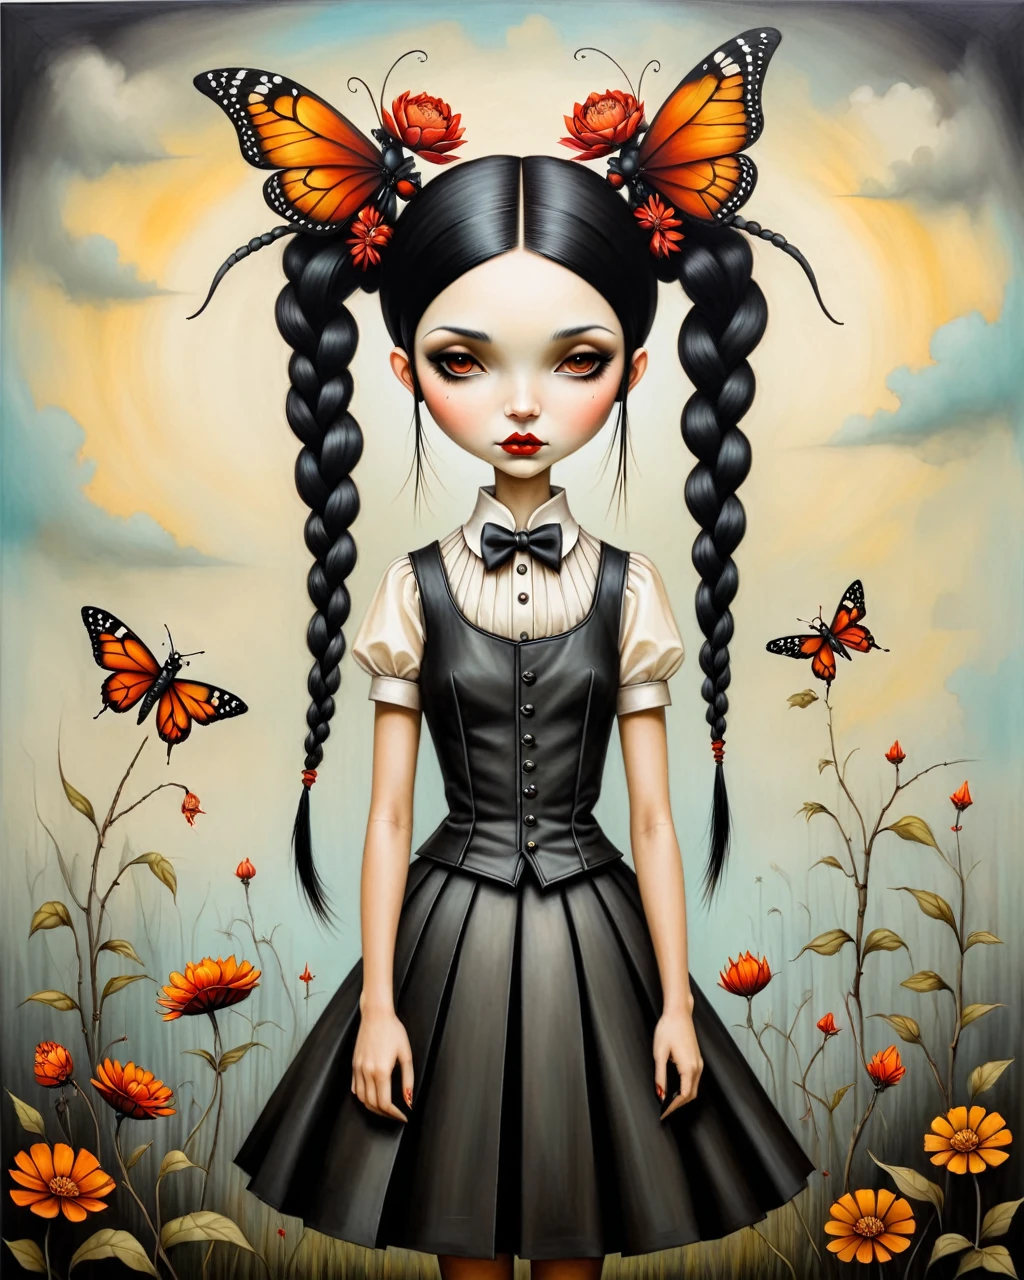 origami style in the style of esao andrews,esao andrews style,esao andrews art,esao andrewsa painting of a girl gothic wednesday addams pale black hair two braids style of esao andrews, andrews esao artstyle, inspired by Esao Andrews, esao andrews ornate, by Esao Andrews, esao andrews, inspired by ESAO, by ESAO,  earley, shrubs and flowers esao andrews, benjamin lacombe, 1girl, bug in the style of esao andrews, esao andrews . paper art, pleated paper, folded, origami art, pleats, cut and fold, centered composition